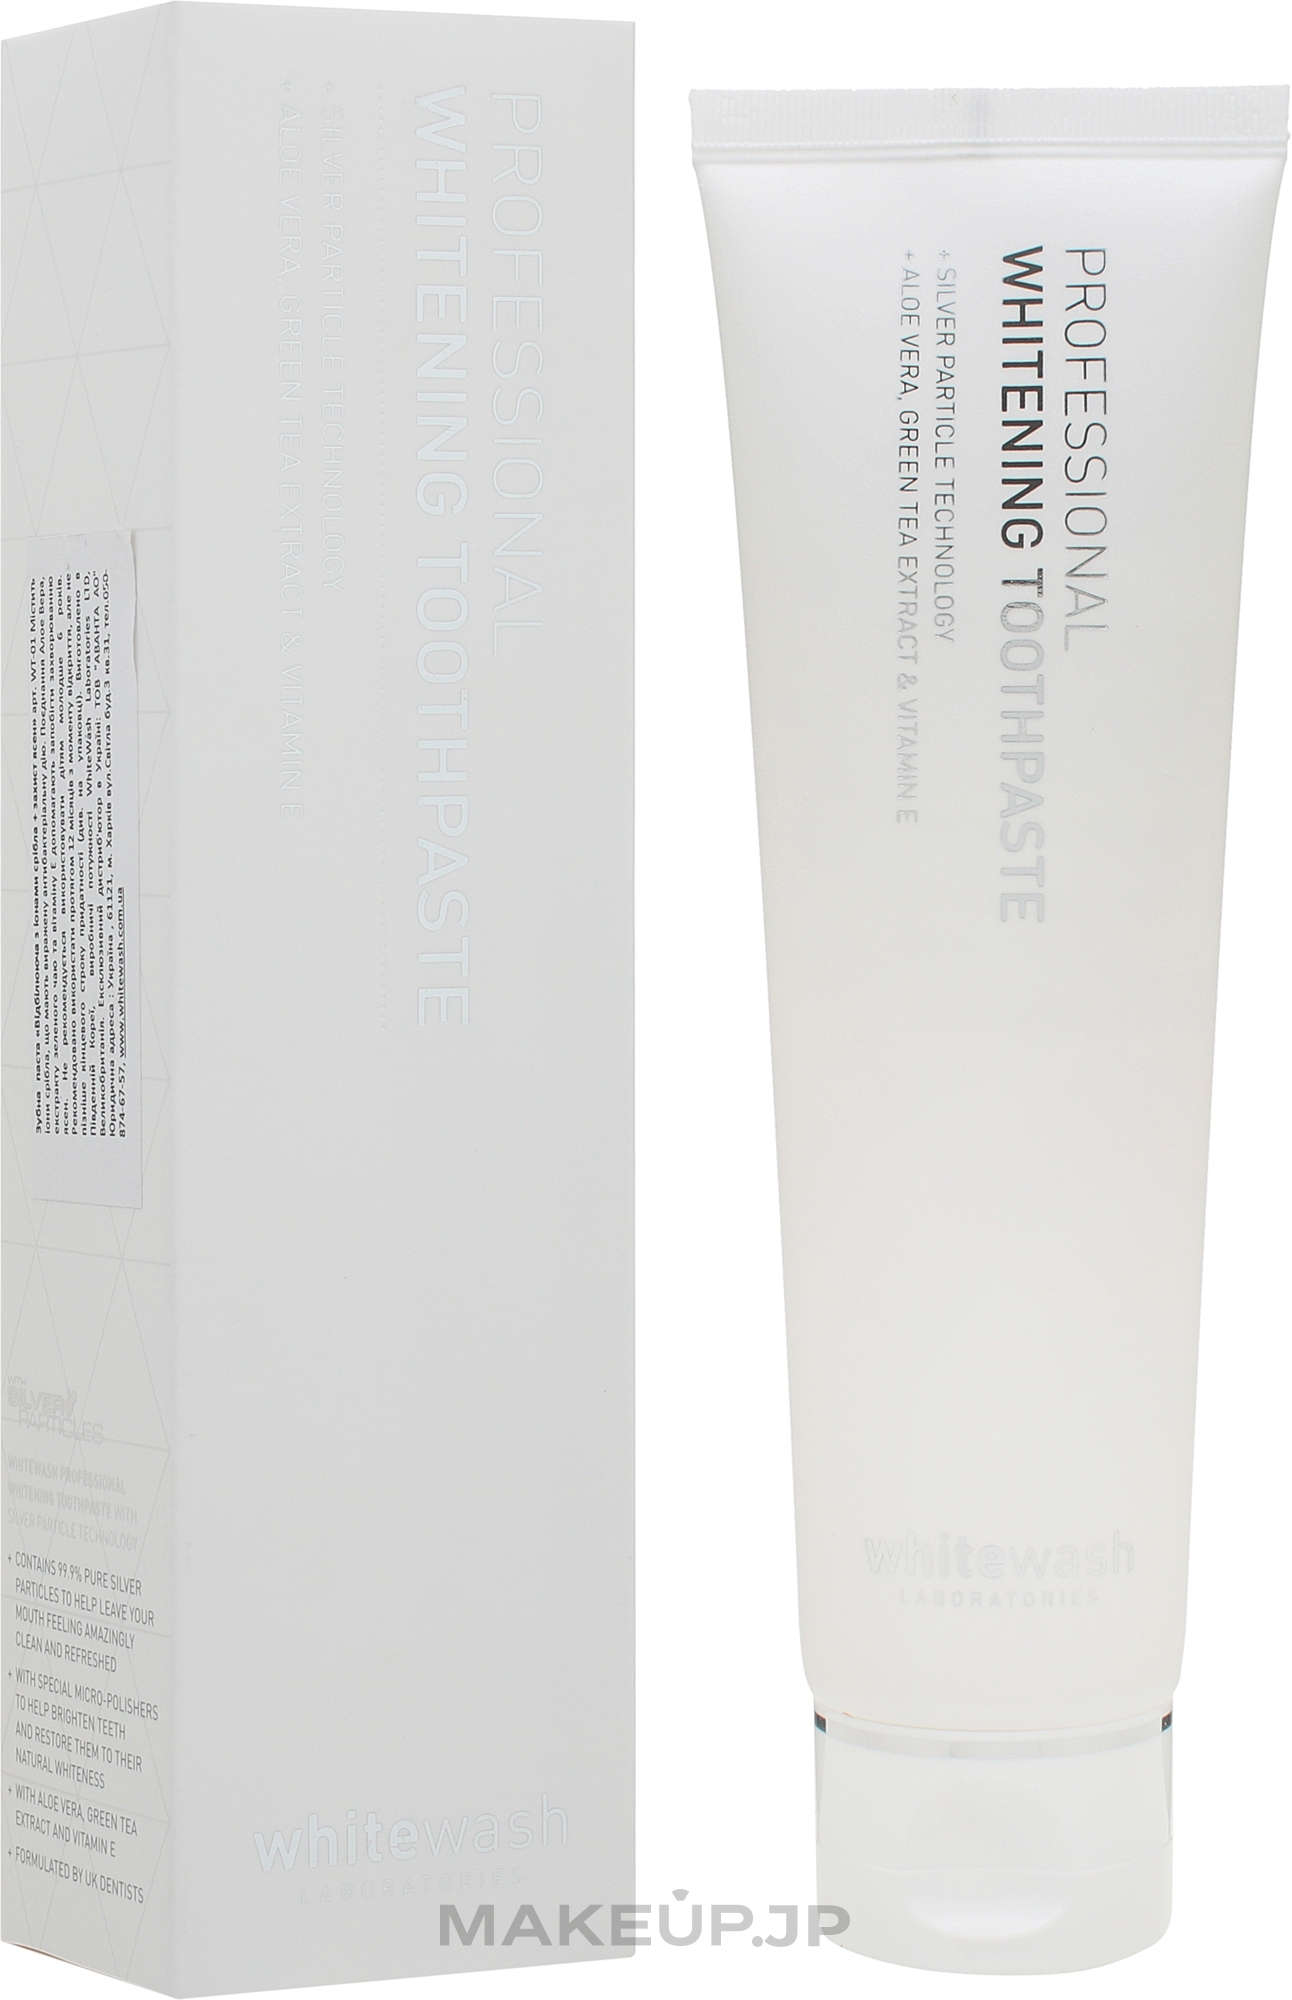 Whitening Toothpaste with Silver Particles + Gum Protection - WhiteWash Laboratories Professional Whitening Toothpaste With Silver Particles — photo 125 ml